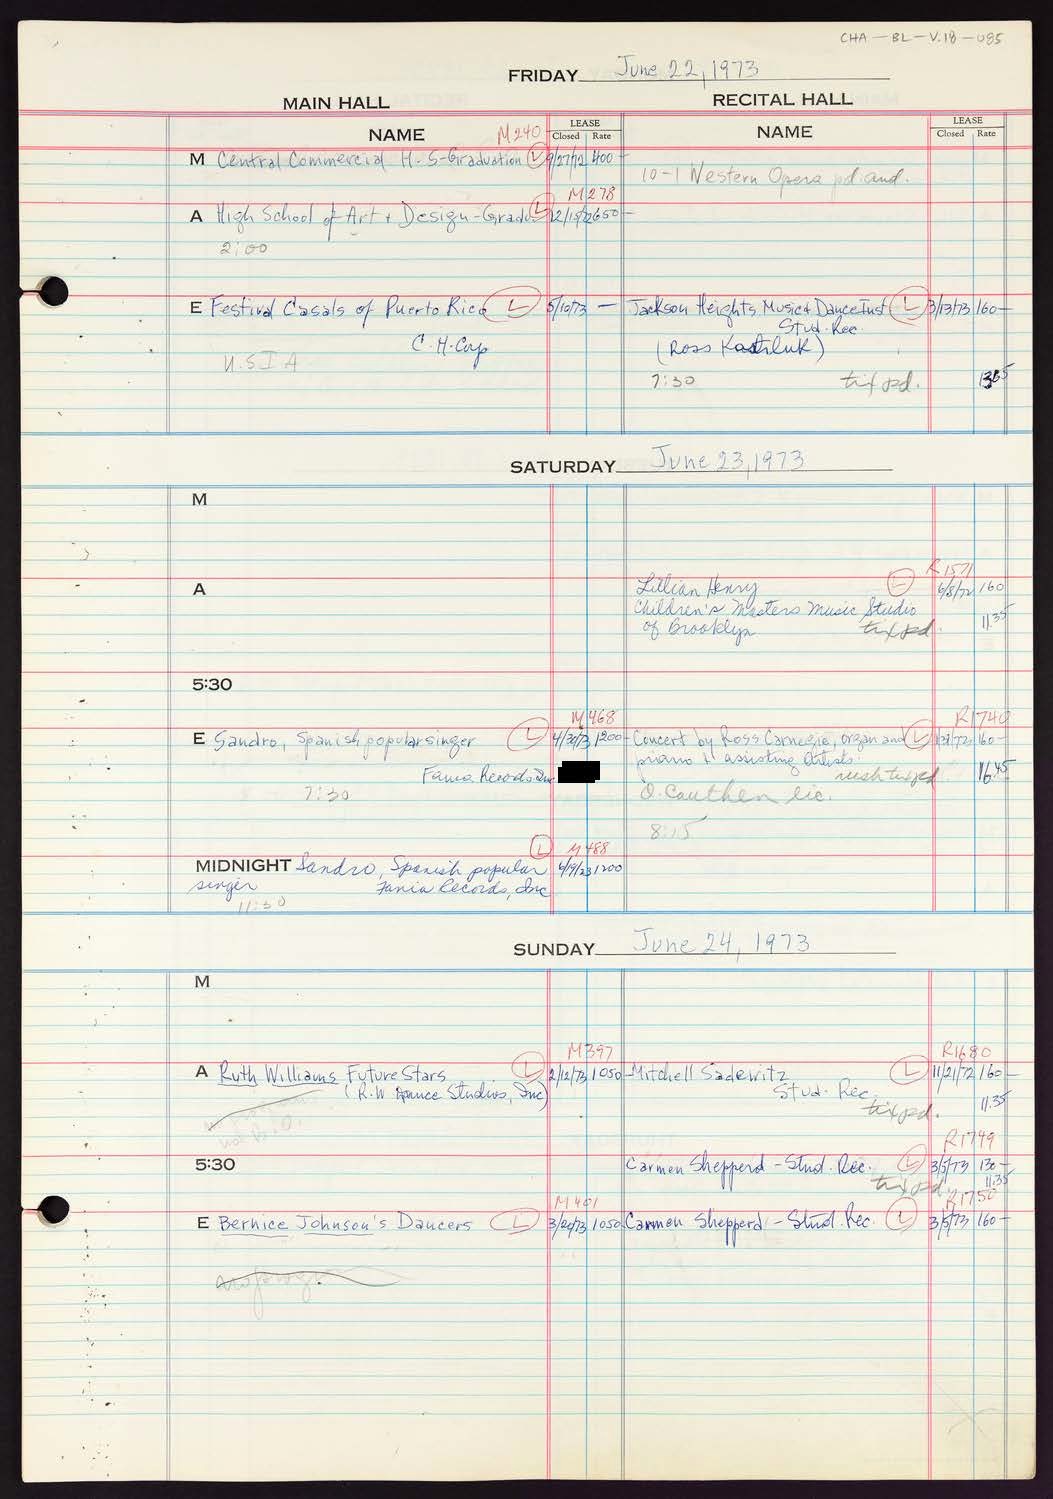 Carnegie Hall Booking Ledger, volume 18, page 85